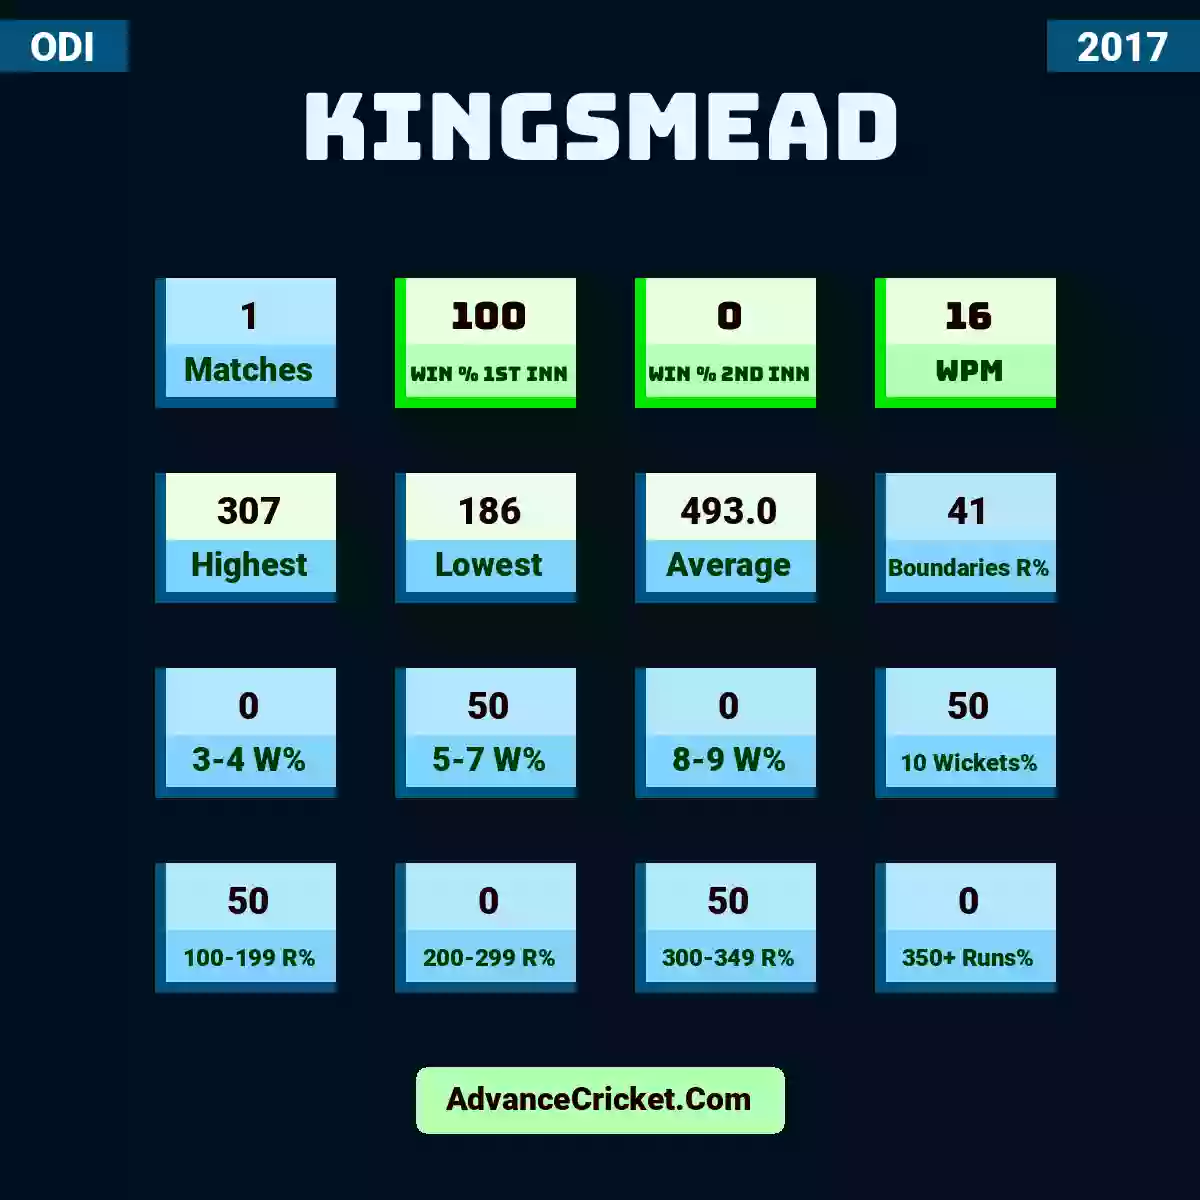 Image showing Kingsmead with Matches: 1, Win % 1st Inn: 100, Win % 2nd Inn: 0, WPM: 16, Highest: 307, Lowest: 186, Average: 493.0, Boundaries R%: 41, 3-4 W%: 0, 5-7 W%: 50, 8-9 W%: 0, 10 Wickets%: 50, 100-199 R%: 50, 200-299 R%: 0, 300-349 R%: 50, 350+ Runs%: 0.